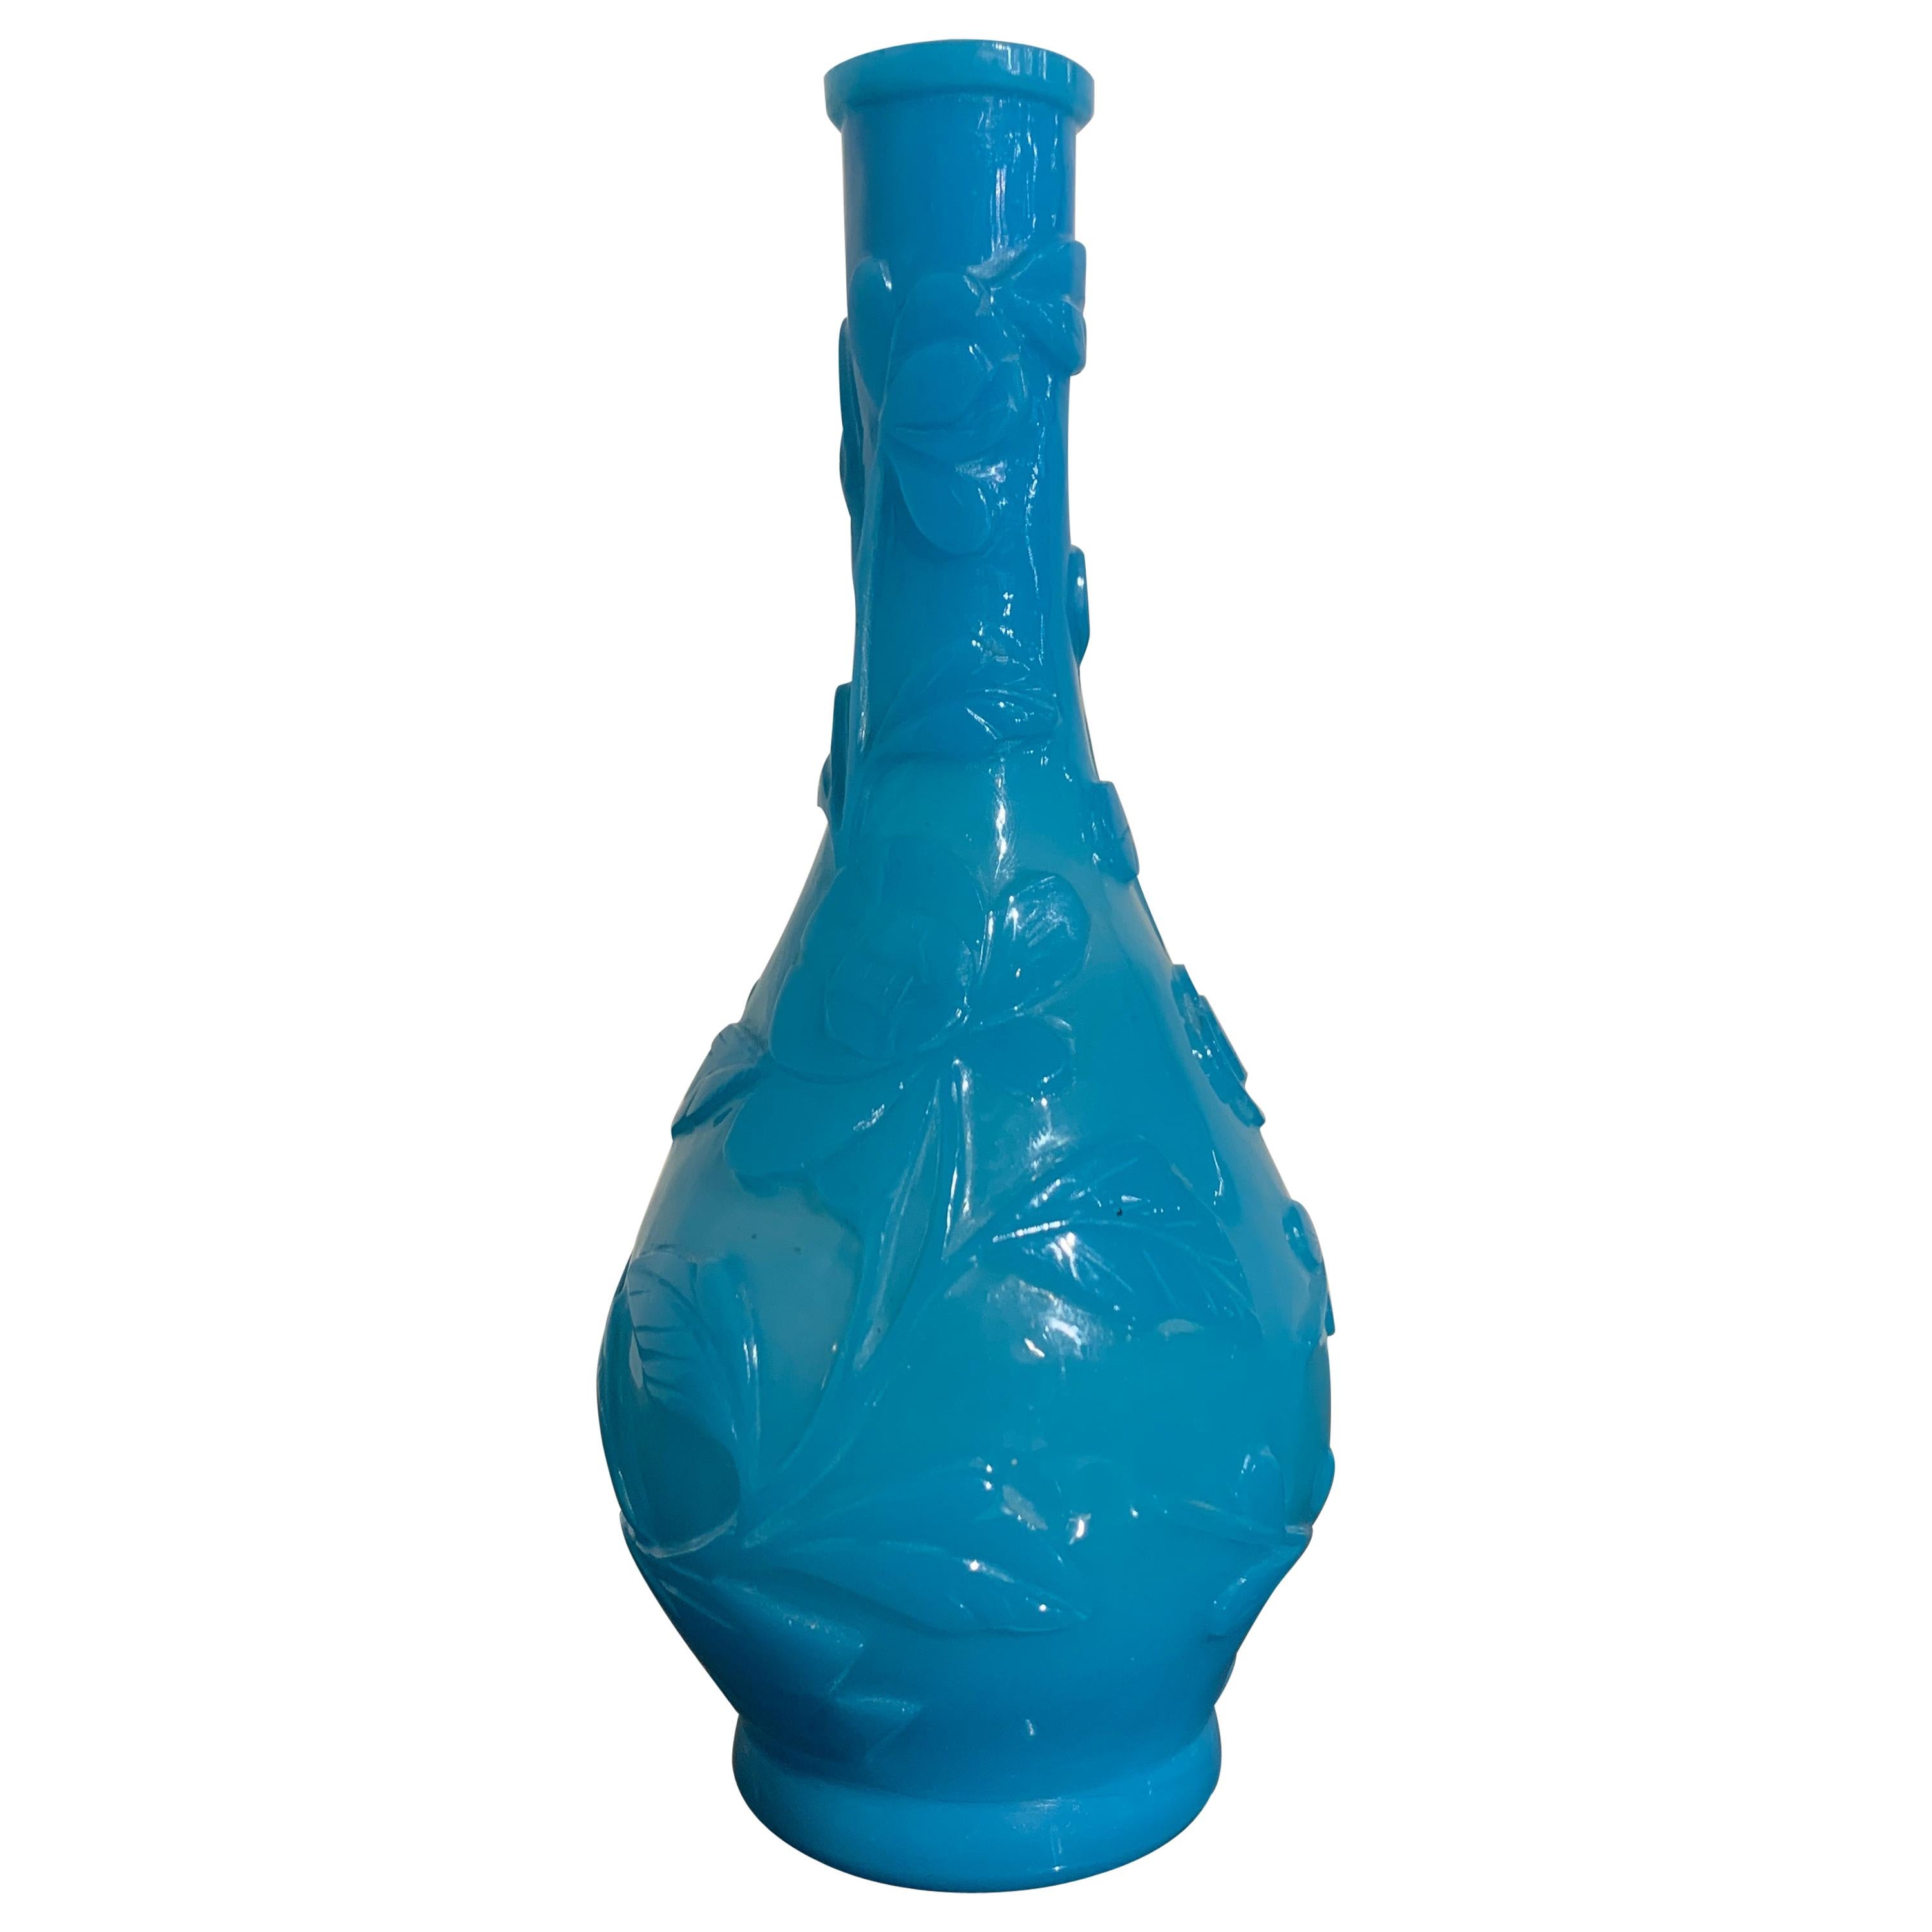 Chinese Turquoise Blue Peking Glass Vase, Republic Period, Early 20th Century For Sale